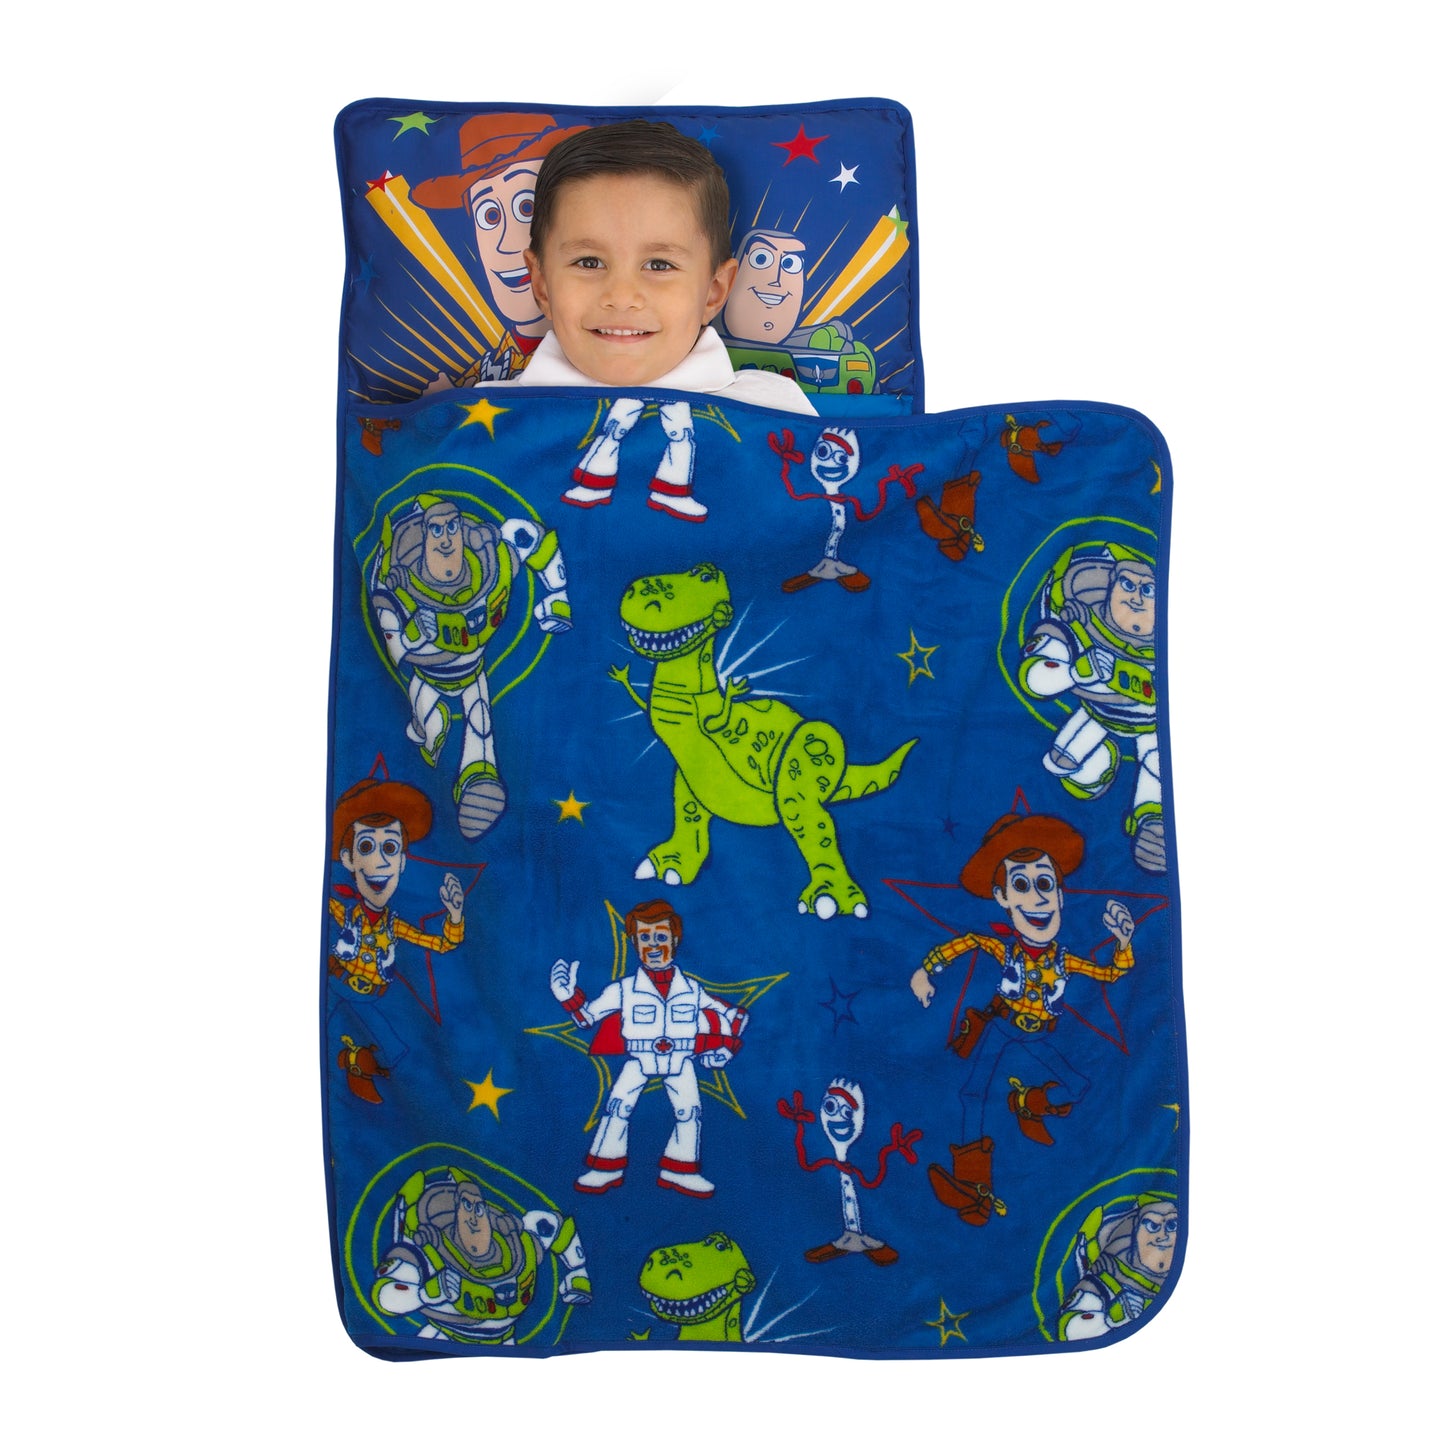 Disney Toy Story Blue and Green Toddler Nap Mat